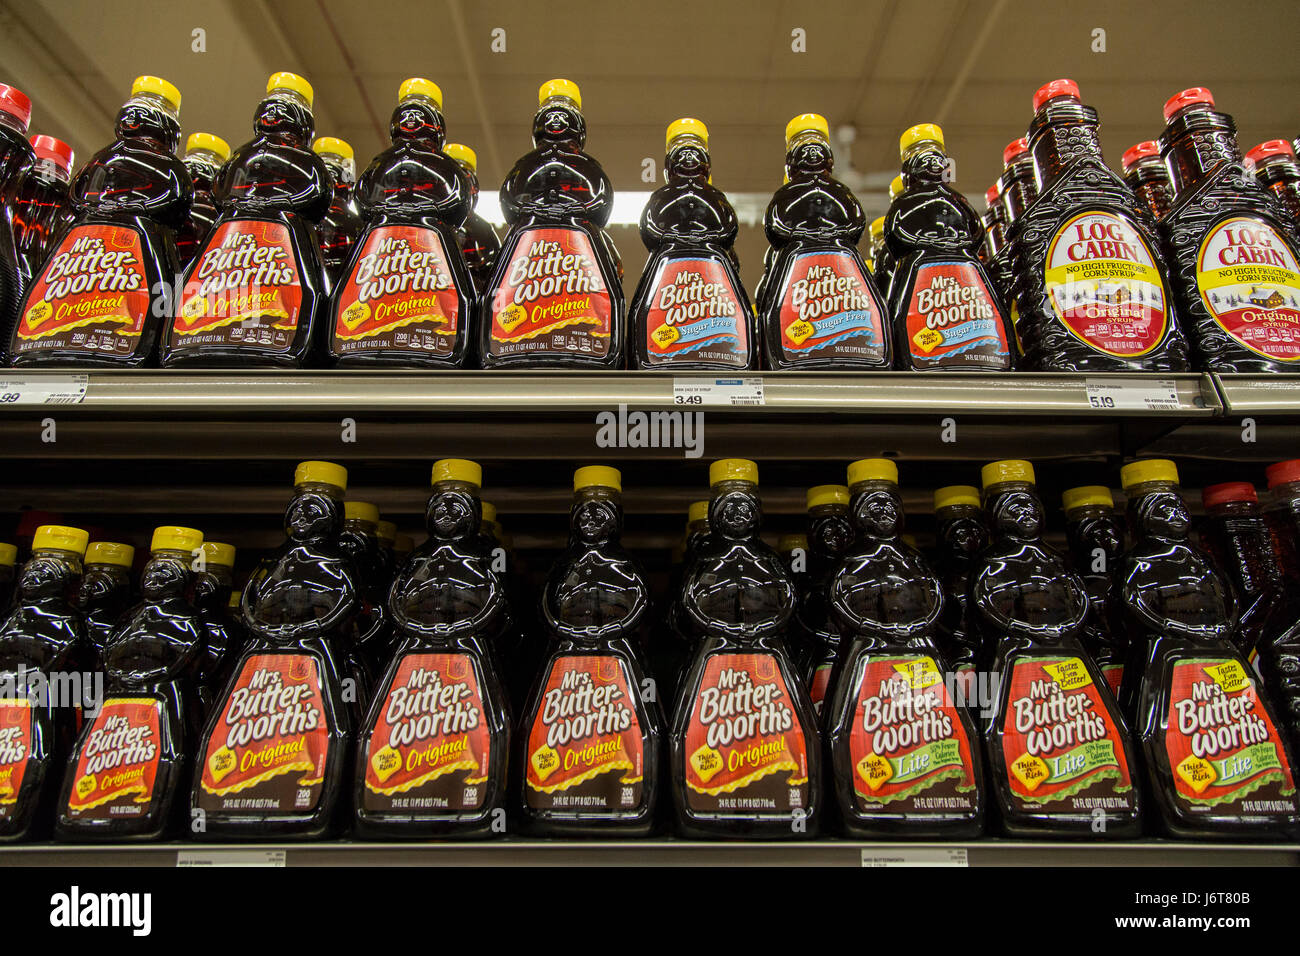 bottles of Mrs. Butterworth's maple syrup on shelves at a grocery store Stock Photo